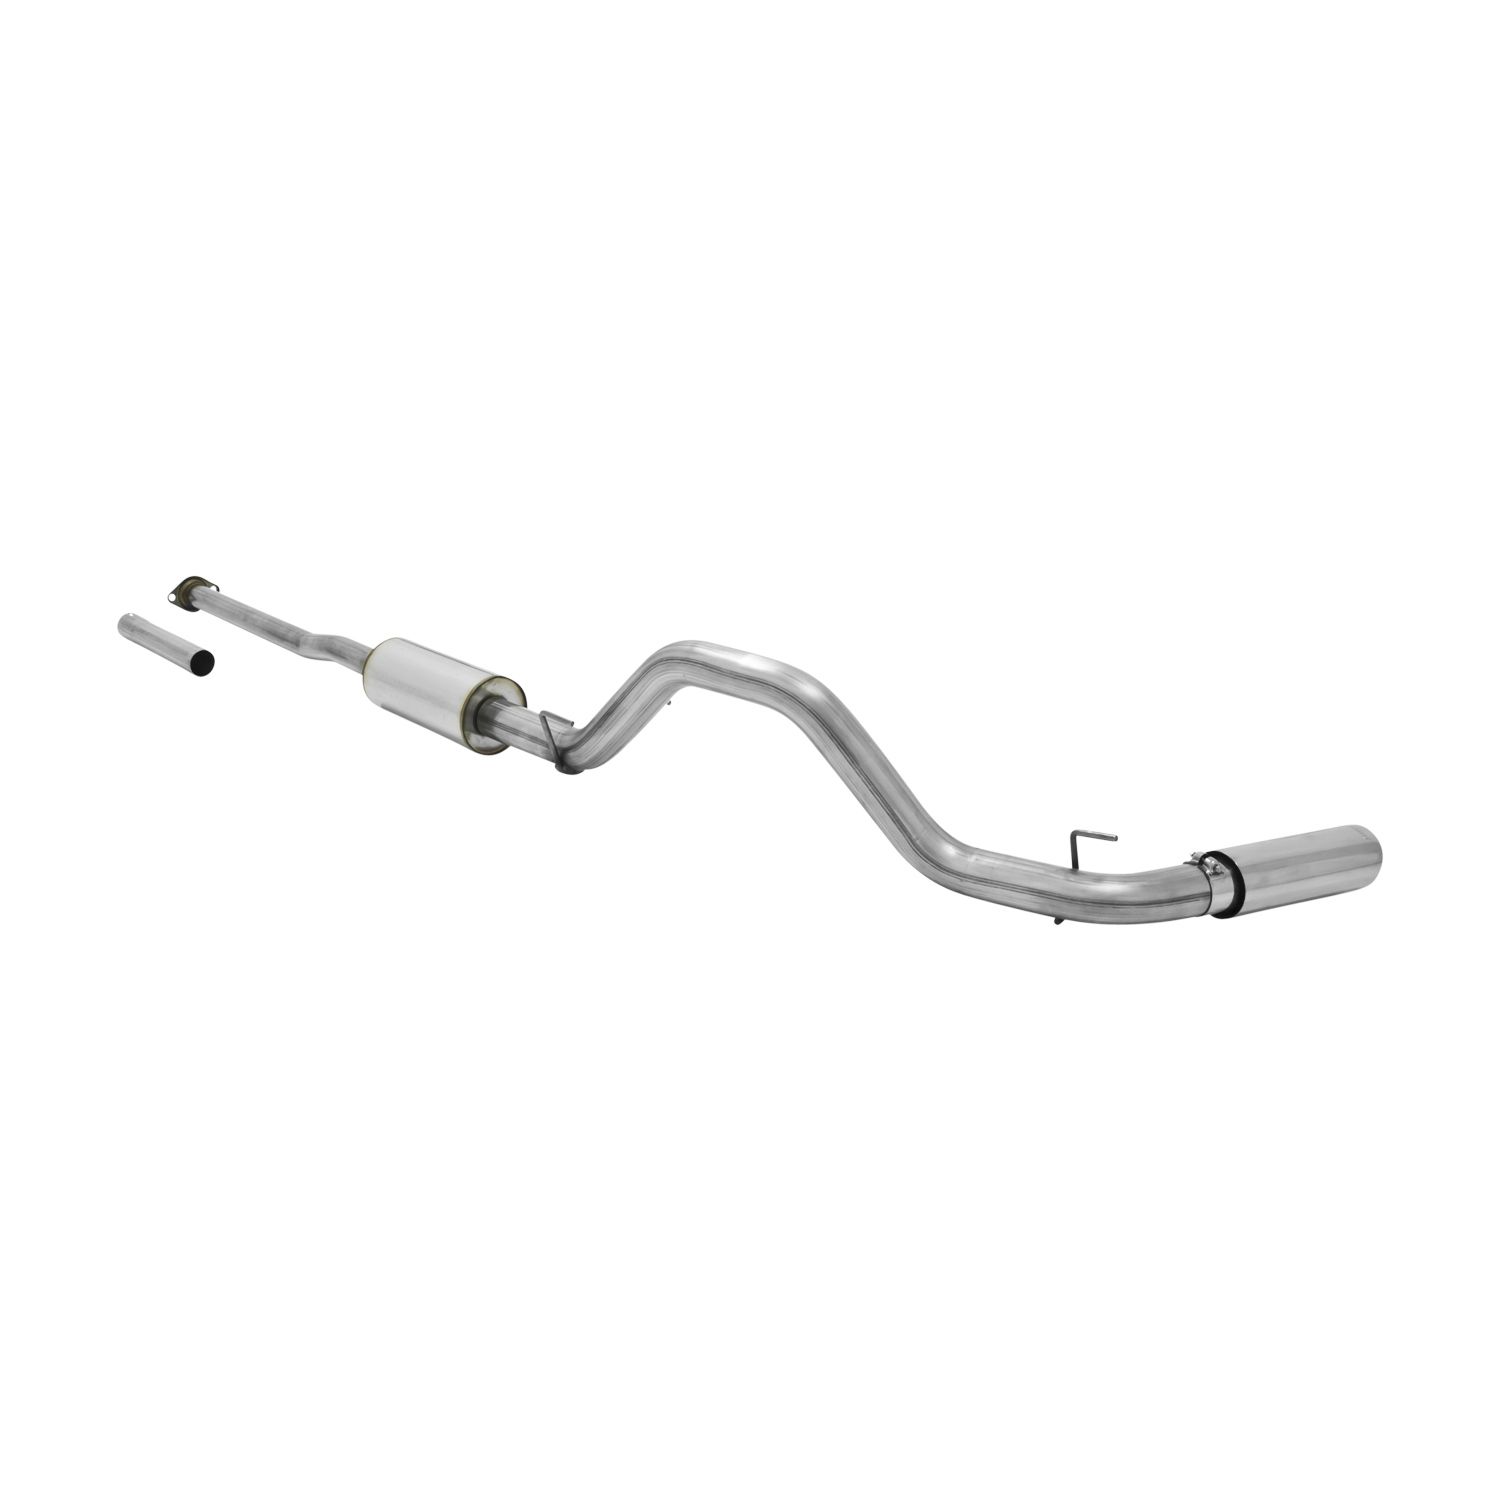 2015 Toyota Tacoma TRD Pro 4.0L Flowmaster dBX Cat-Back Exhaust